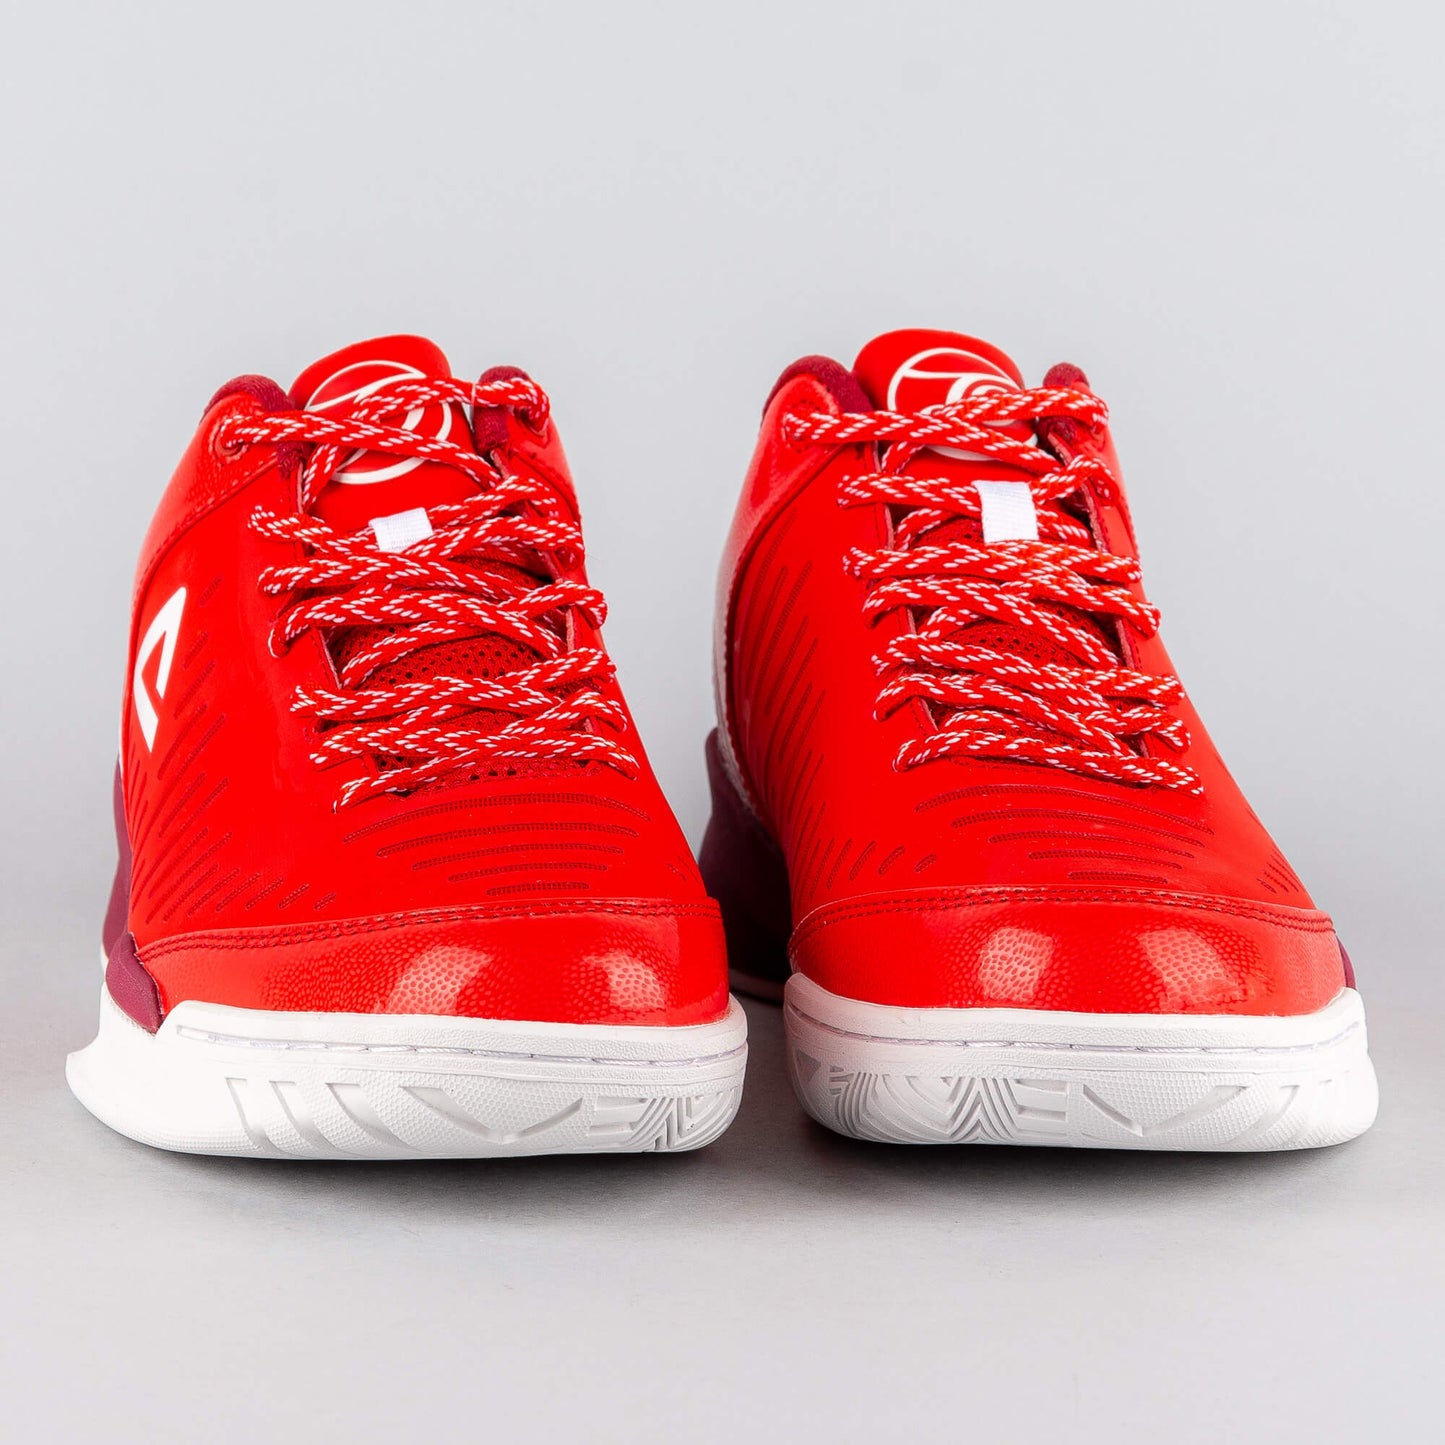 Peak Basketball Shoes Tony Parker TP9-II Play Style Red